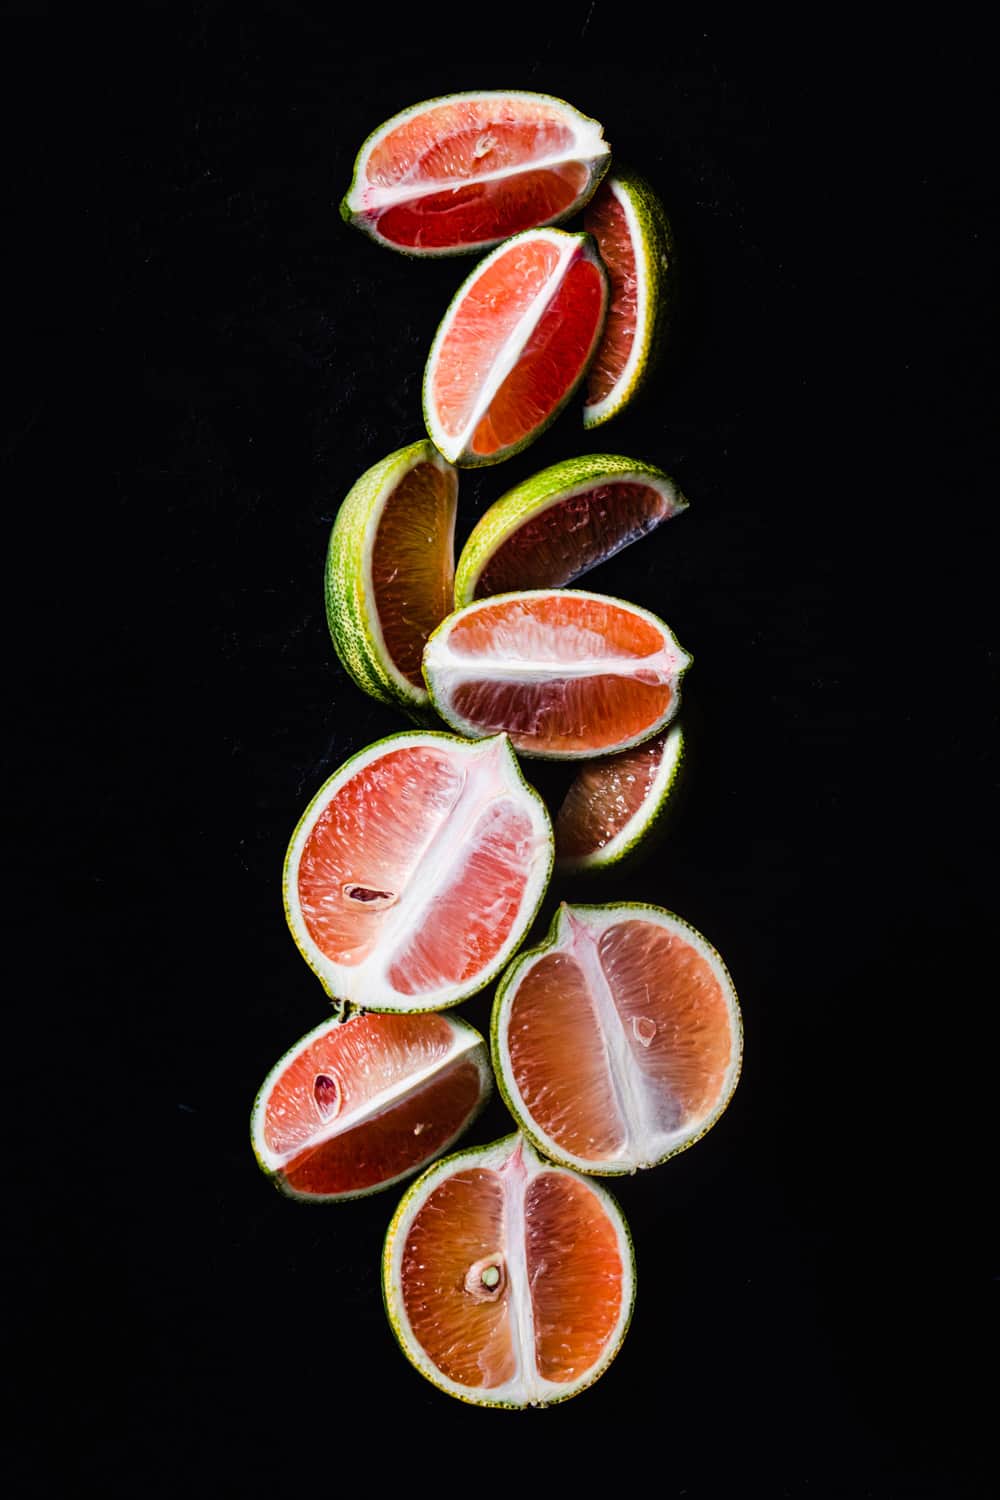 pink fleshed lemons with variegated green and yellow striped rind outside cut into wedges on a black background; overhead shot.